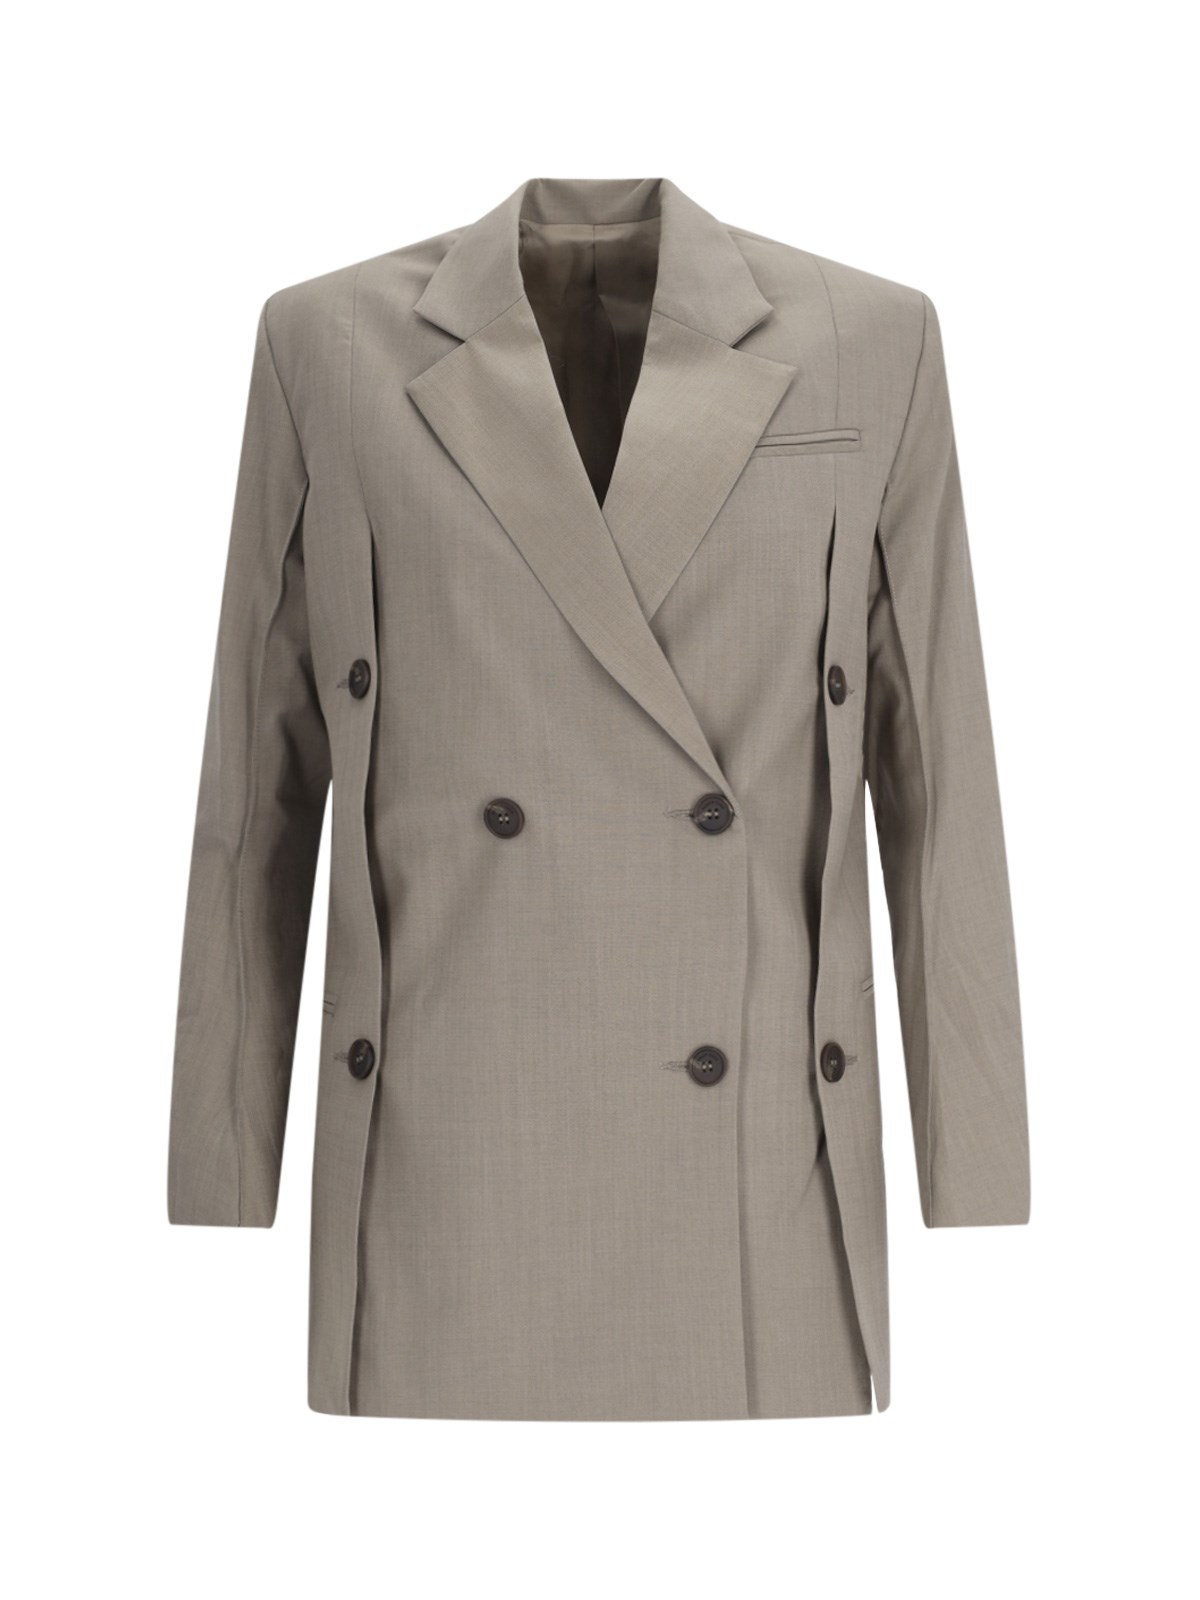 Eudon Choi 'beatrice' Double-breasted Blazer In Beige